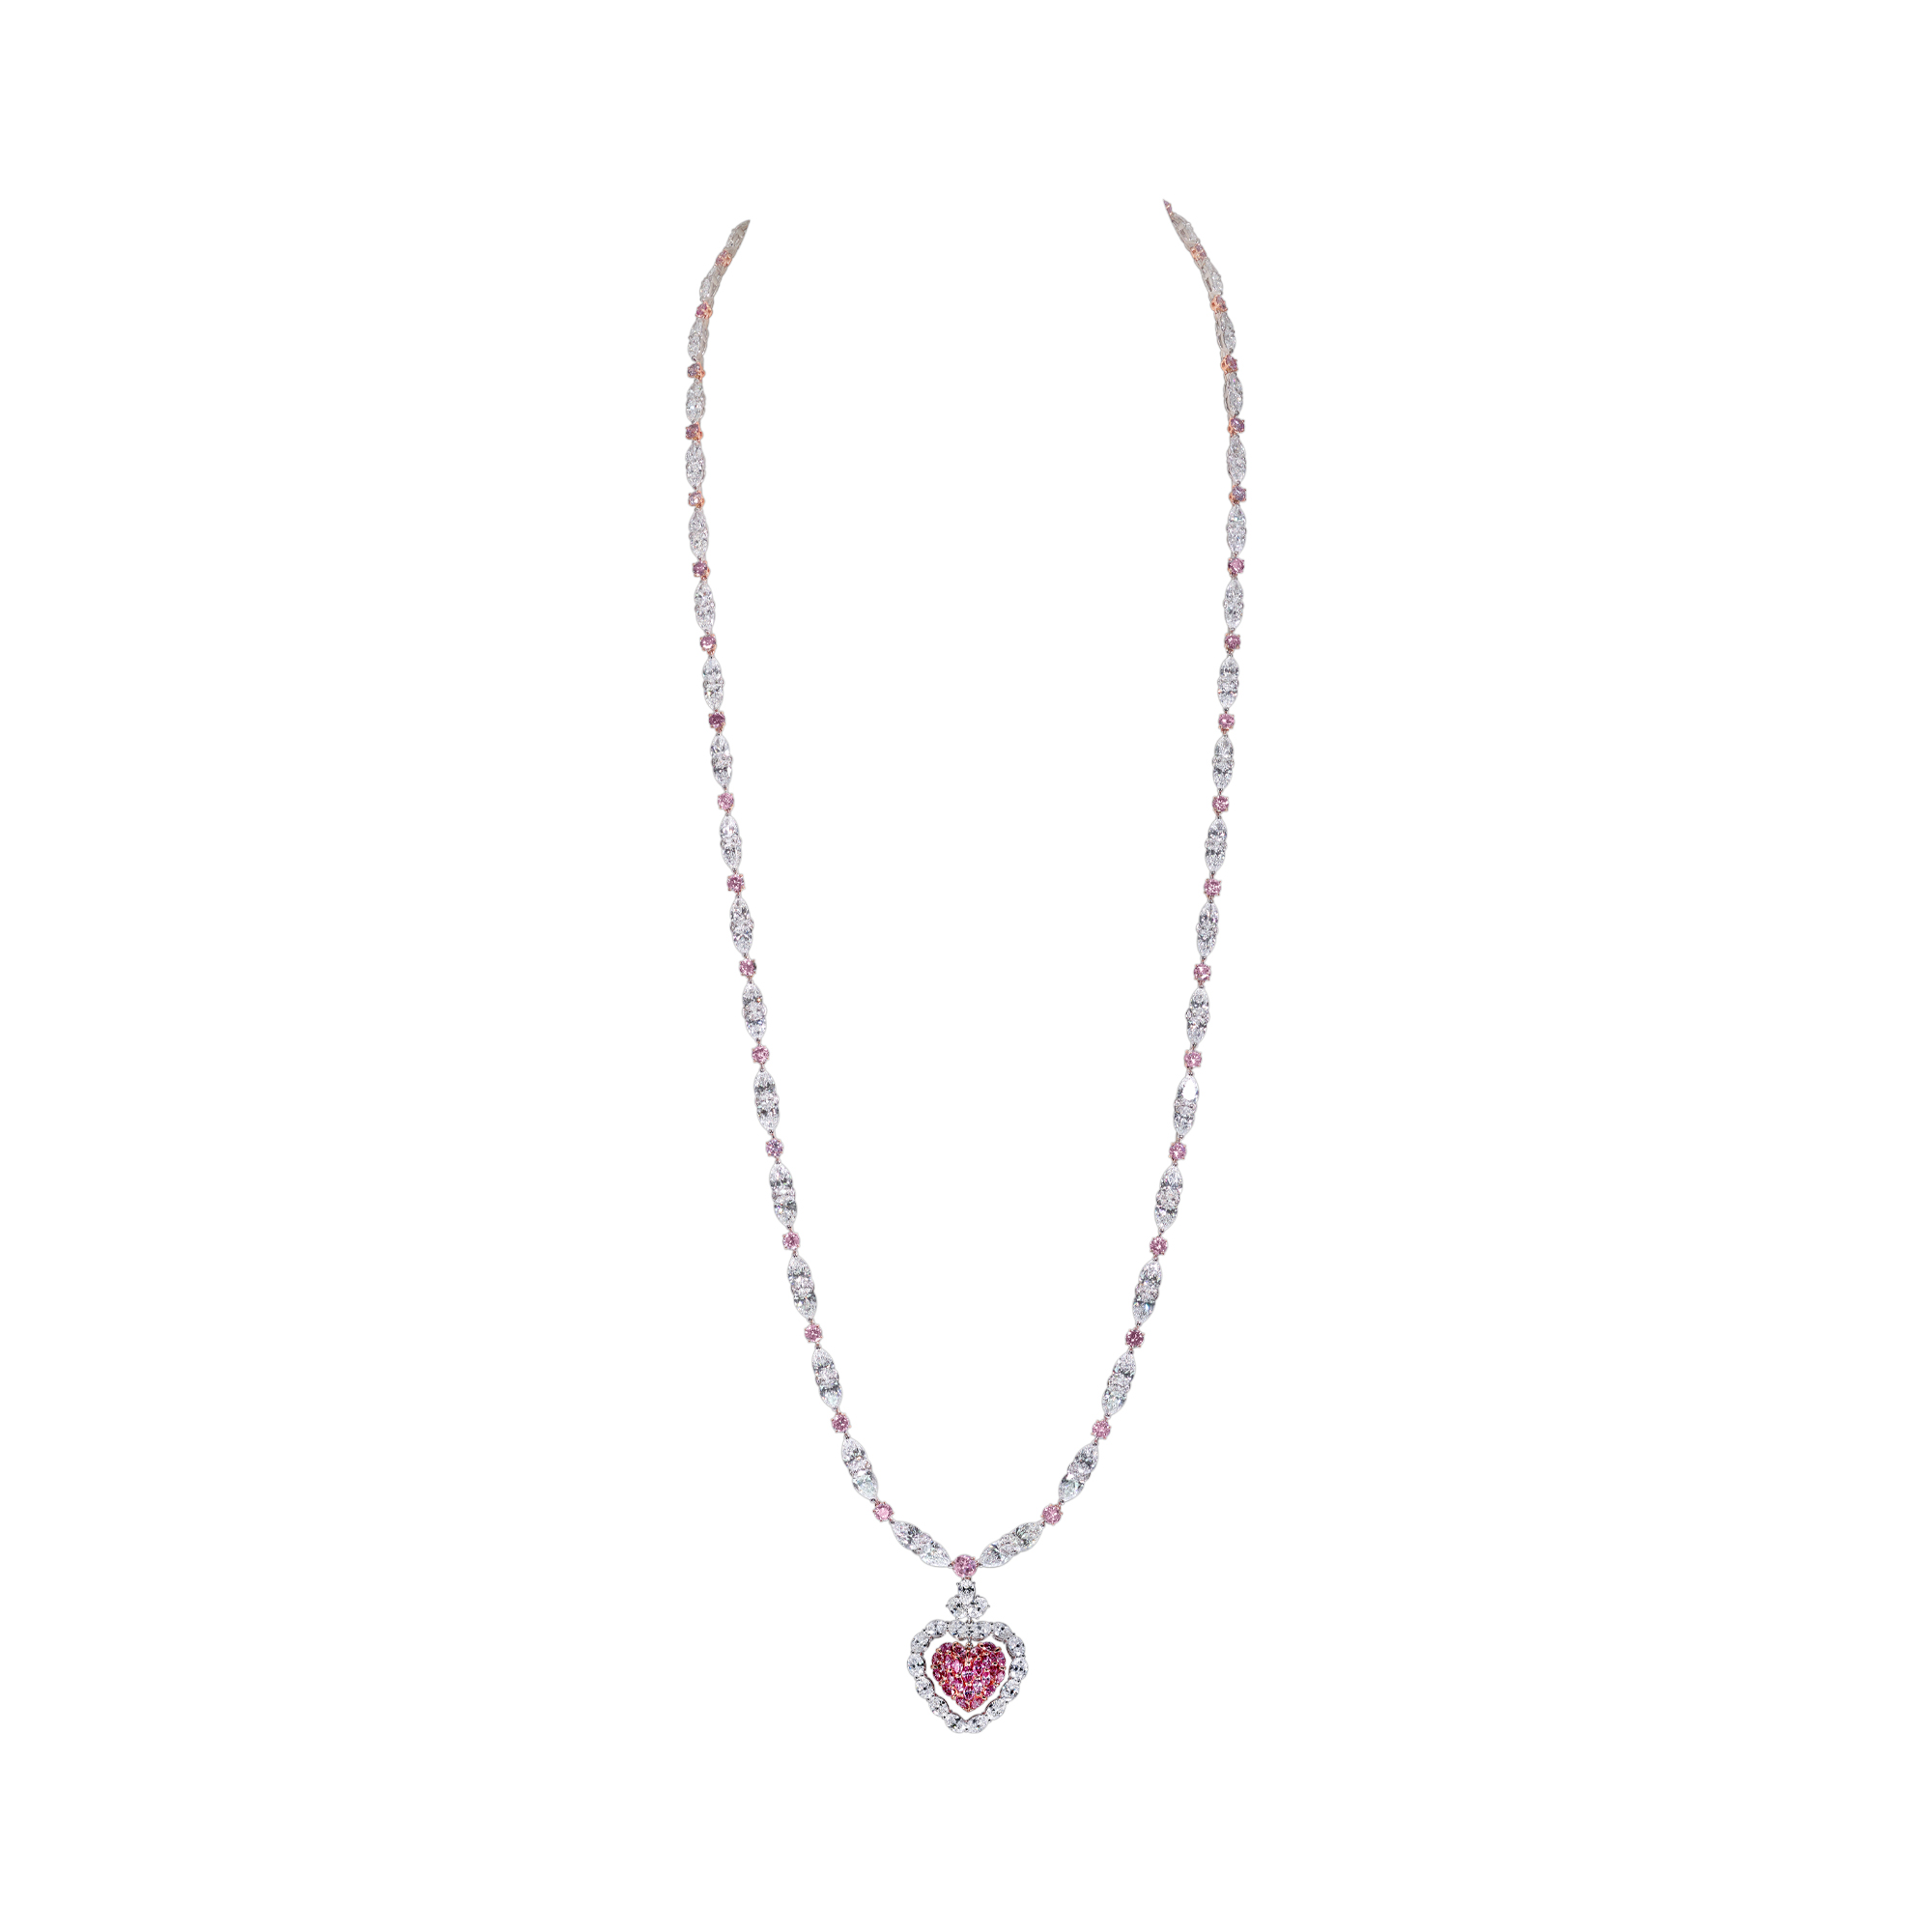 White and Pink Diamond Line Necklace - Moussaieff